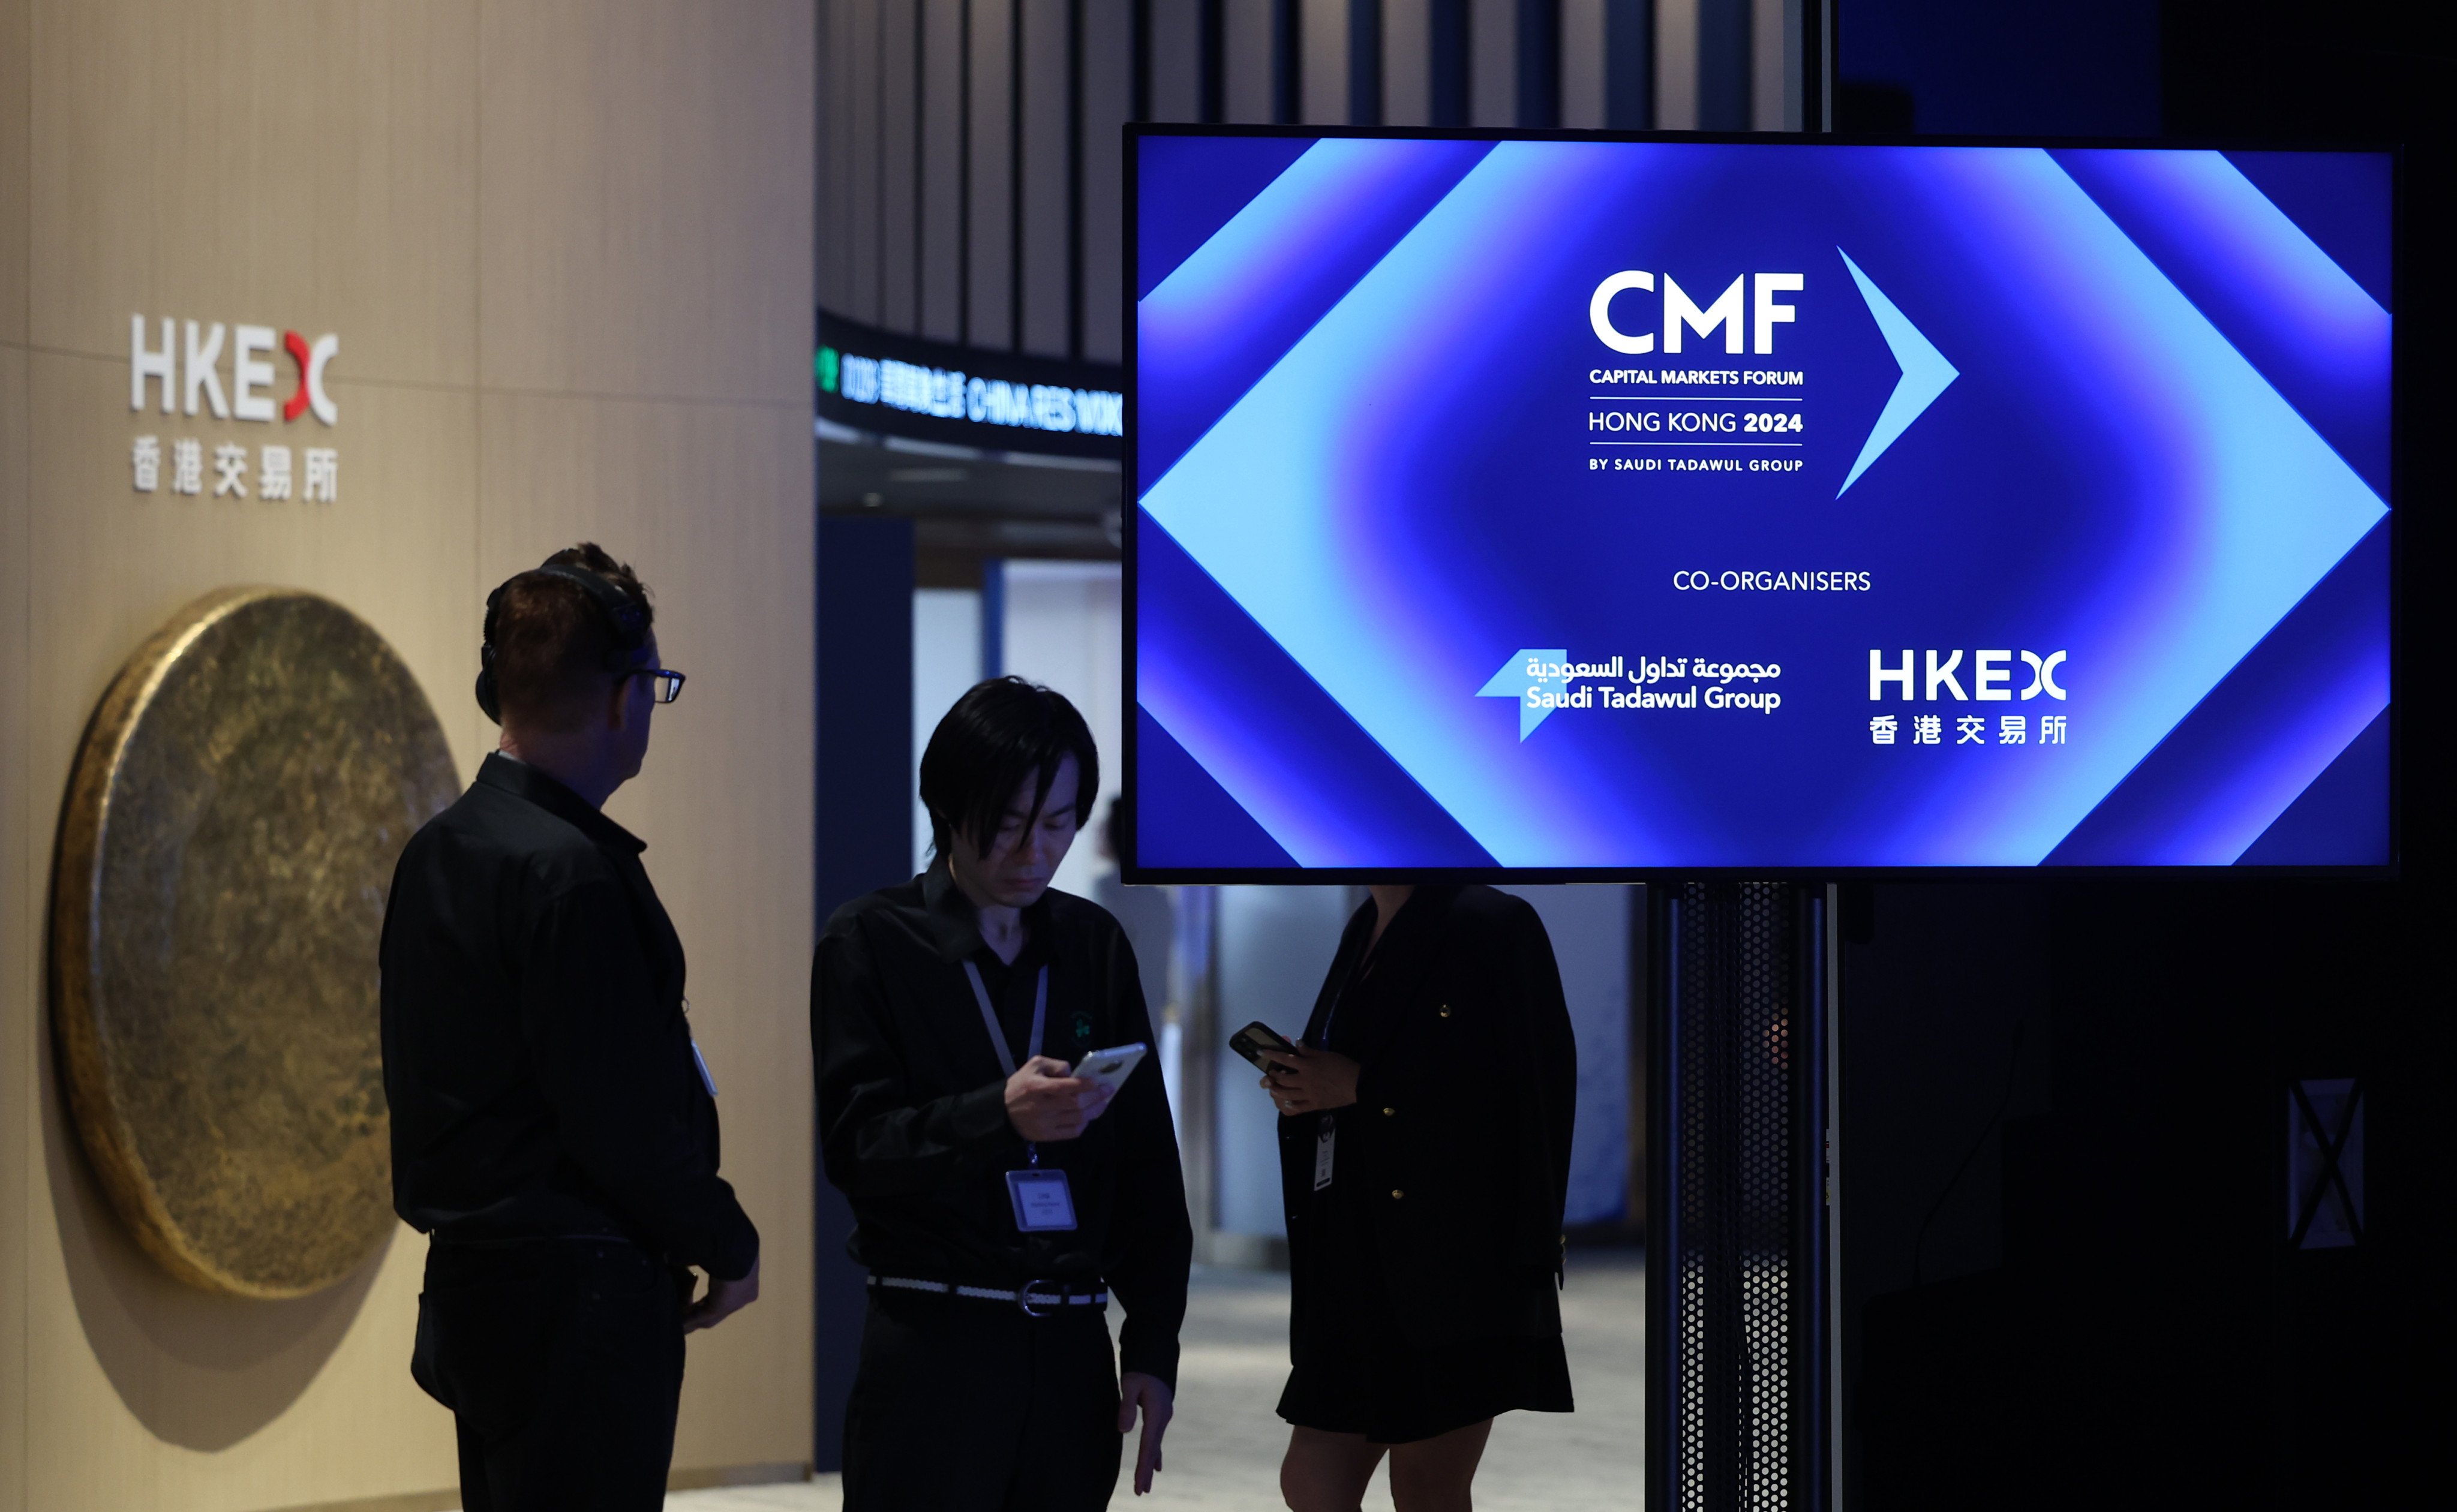 The Saudi Tadawul Group organised the Capital Markets Forum in Hong Kong, the first time the flagship event has been held outside kingdom. Photo: Edmond So